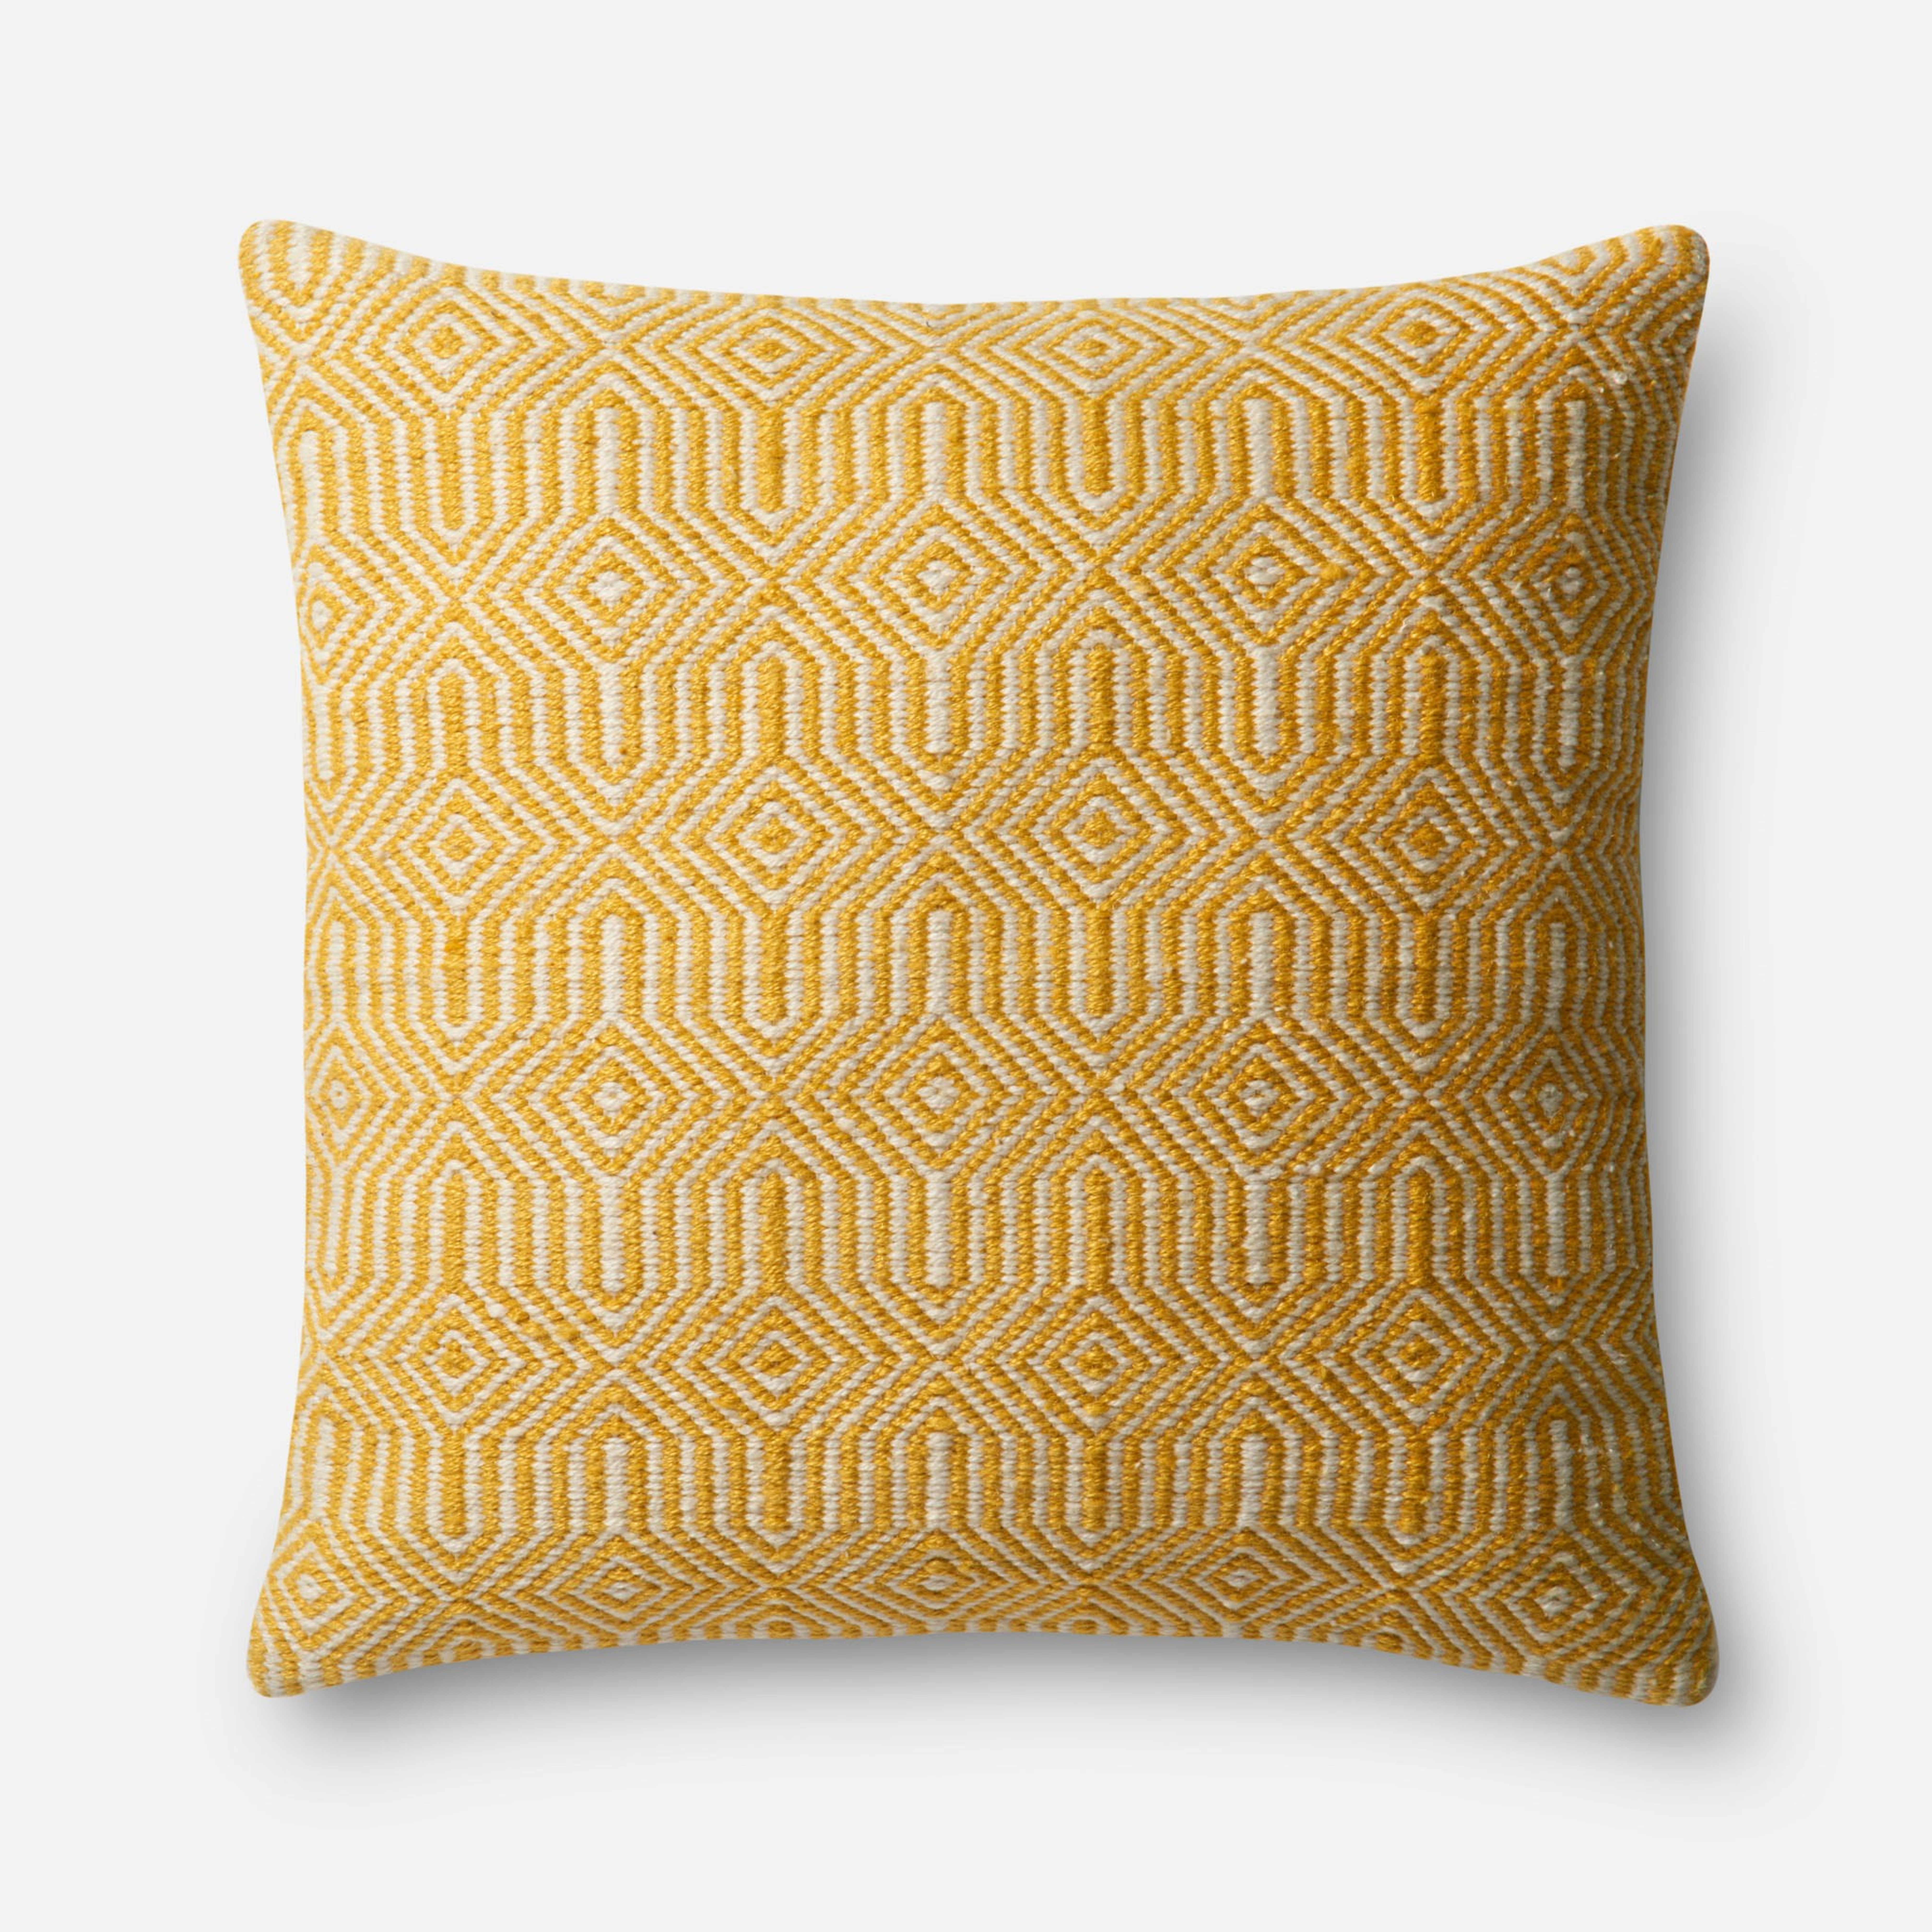 Patterned Indoor/Outdoor Throw Pillow Cover, Yellow & Ivory, 22" x 22" - Loma Threads